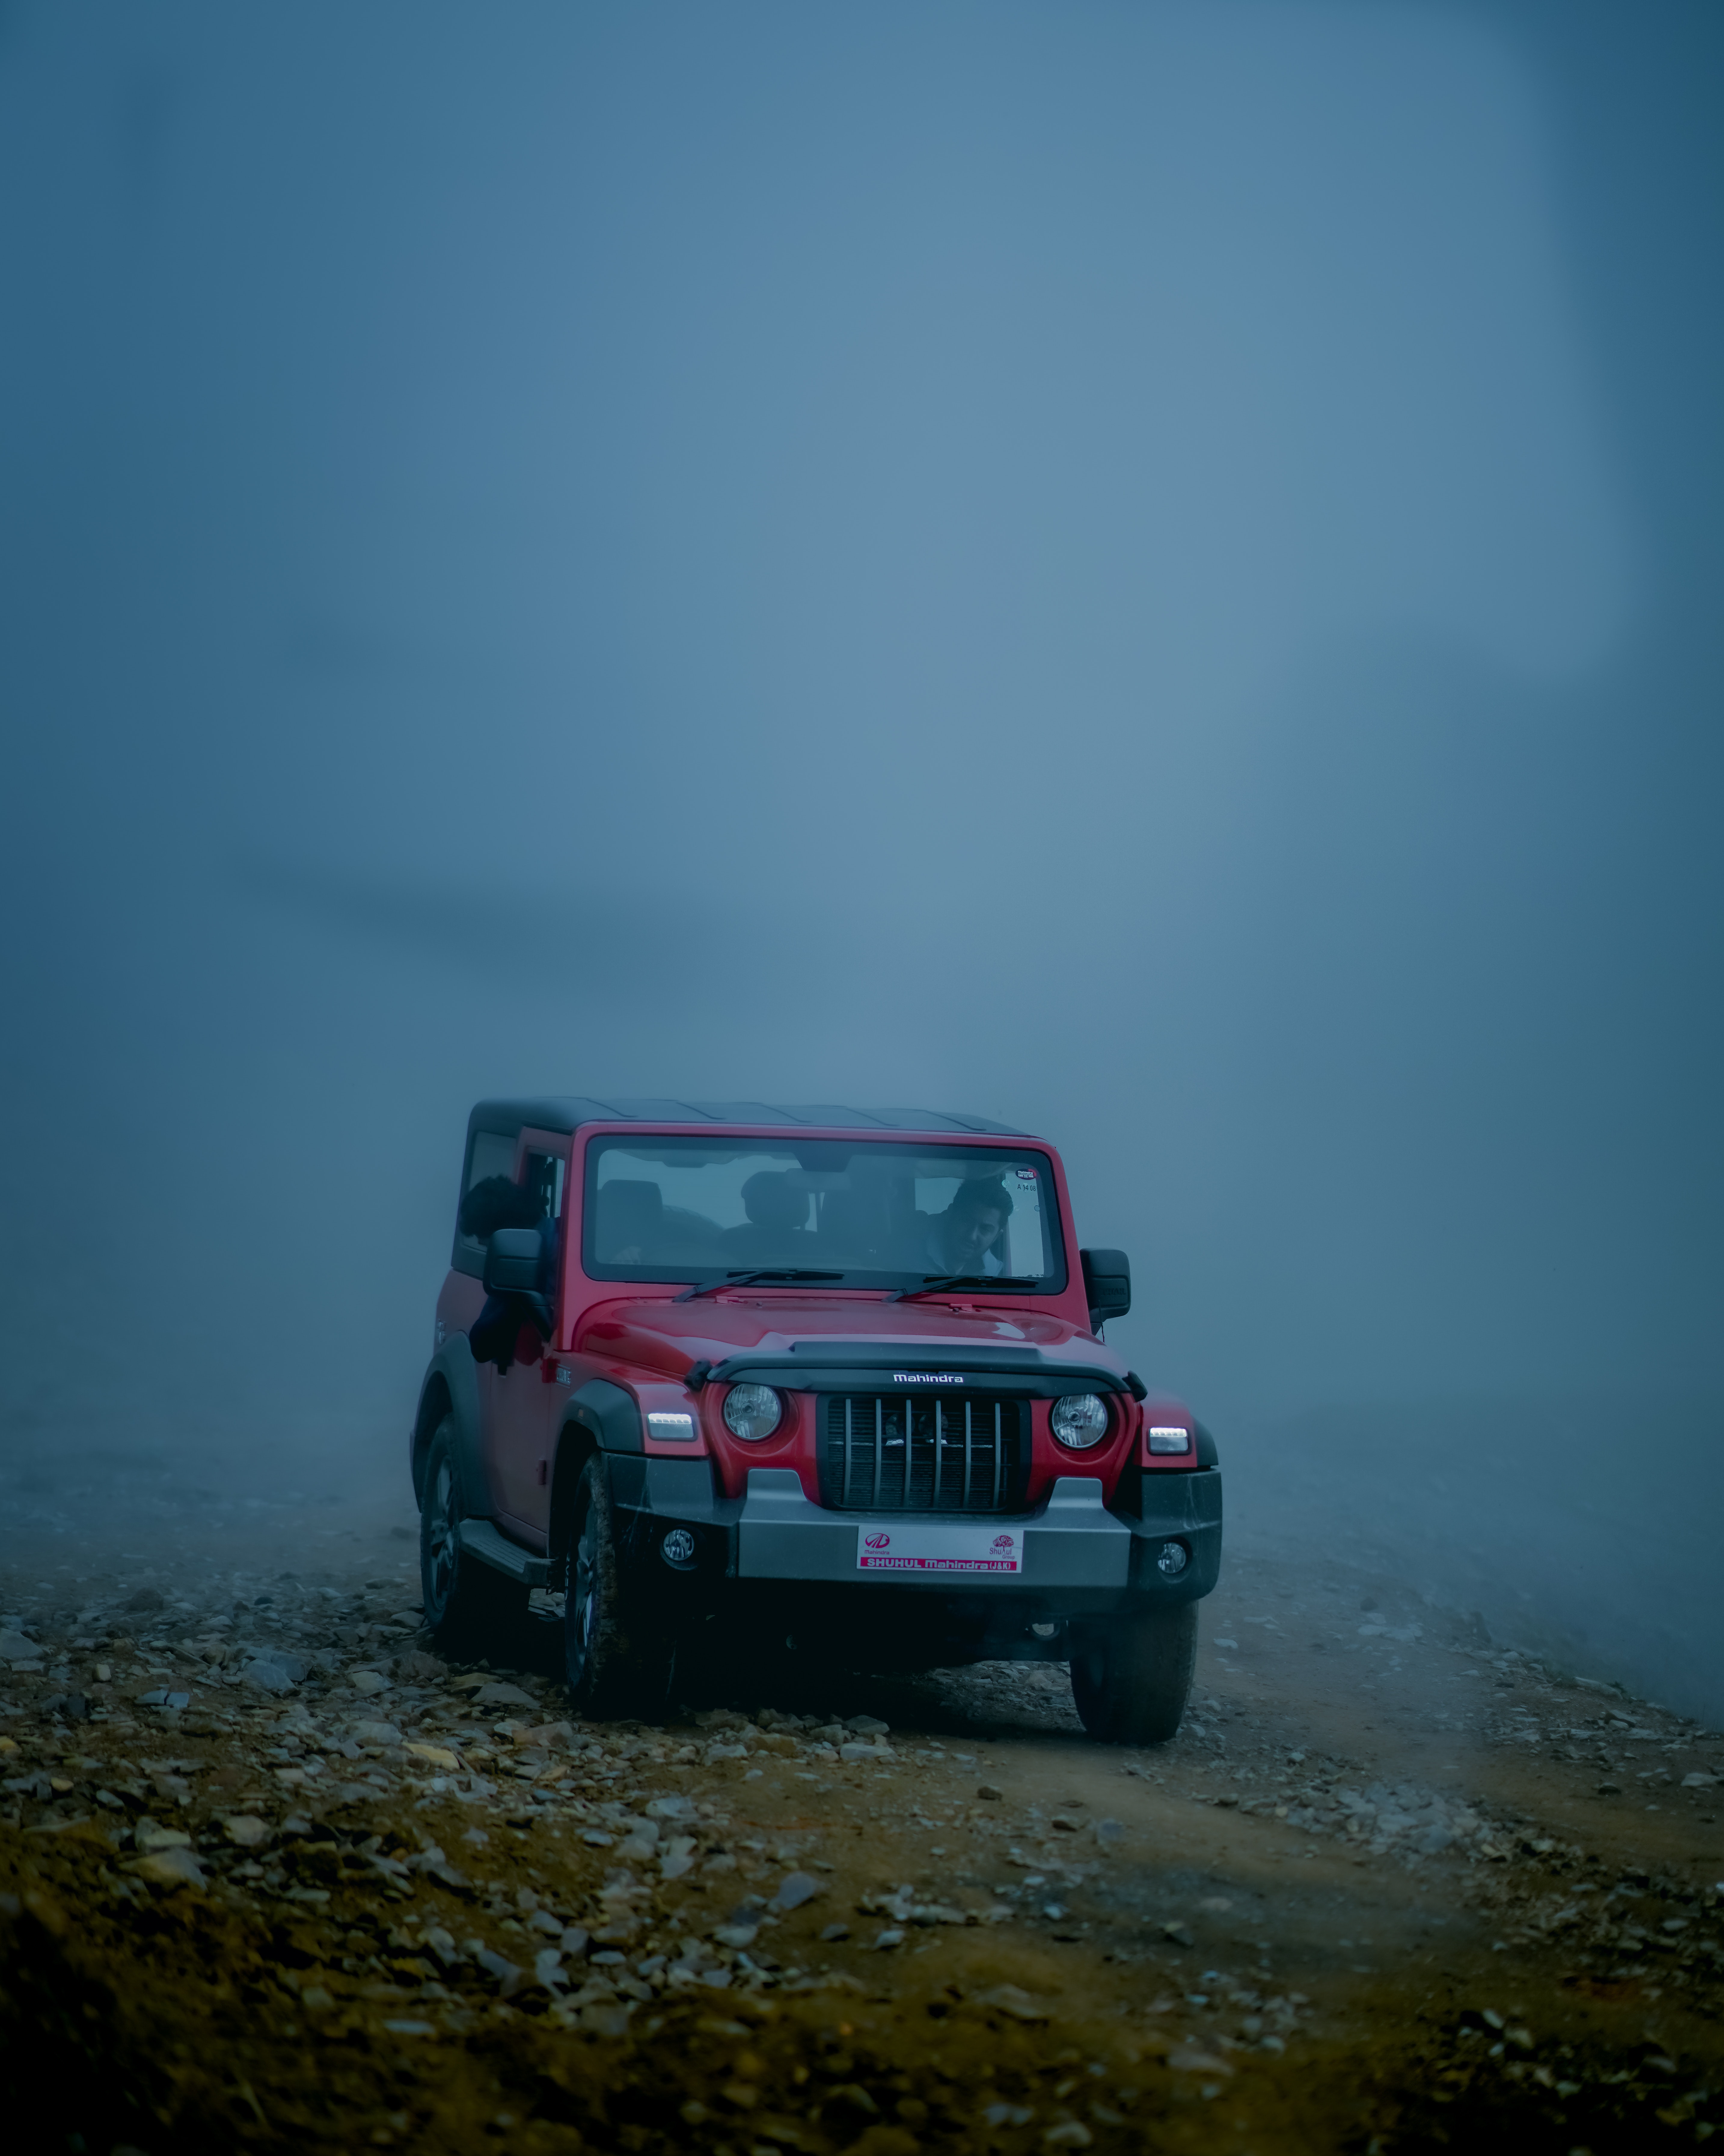 A Red Mahindra Thar on Dirt Road · Free